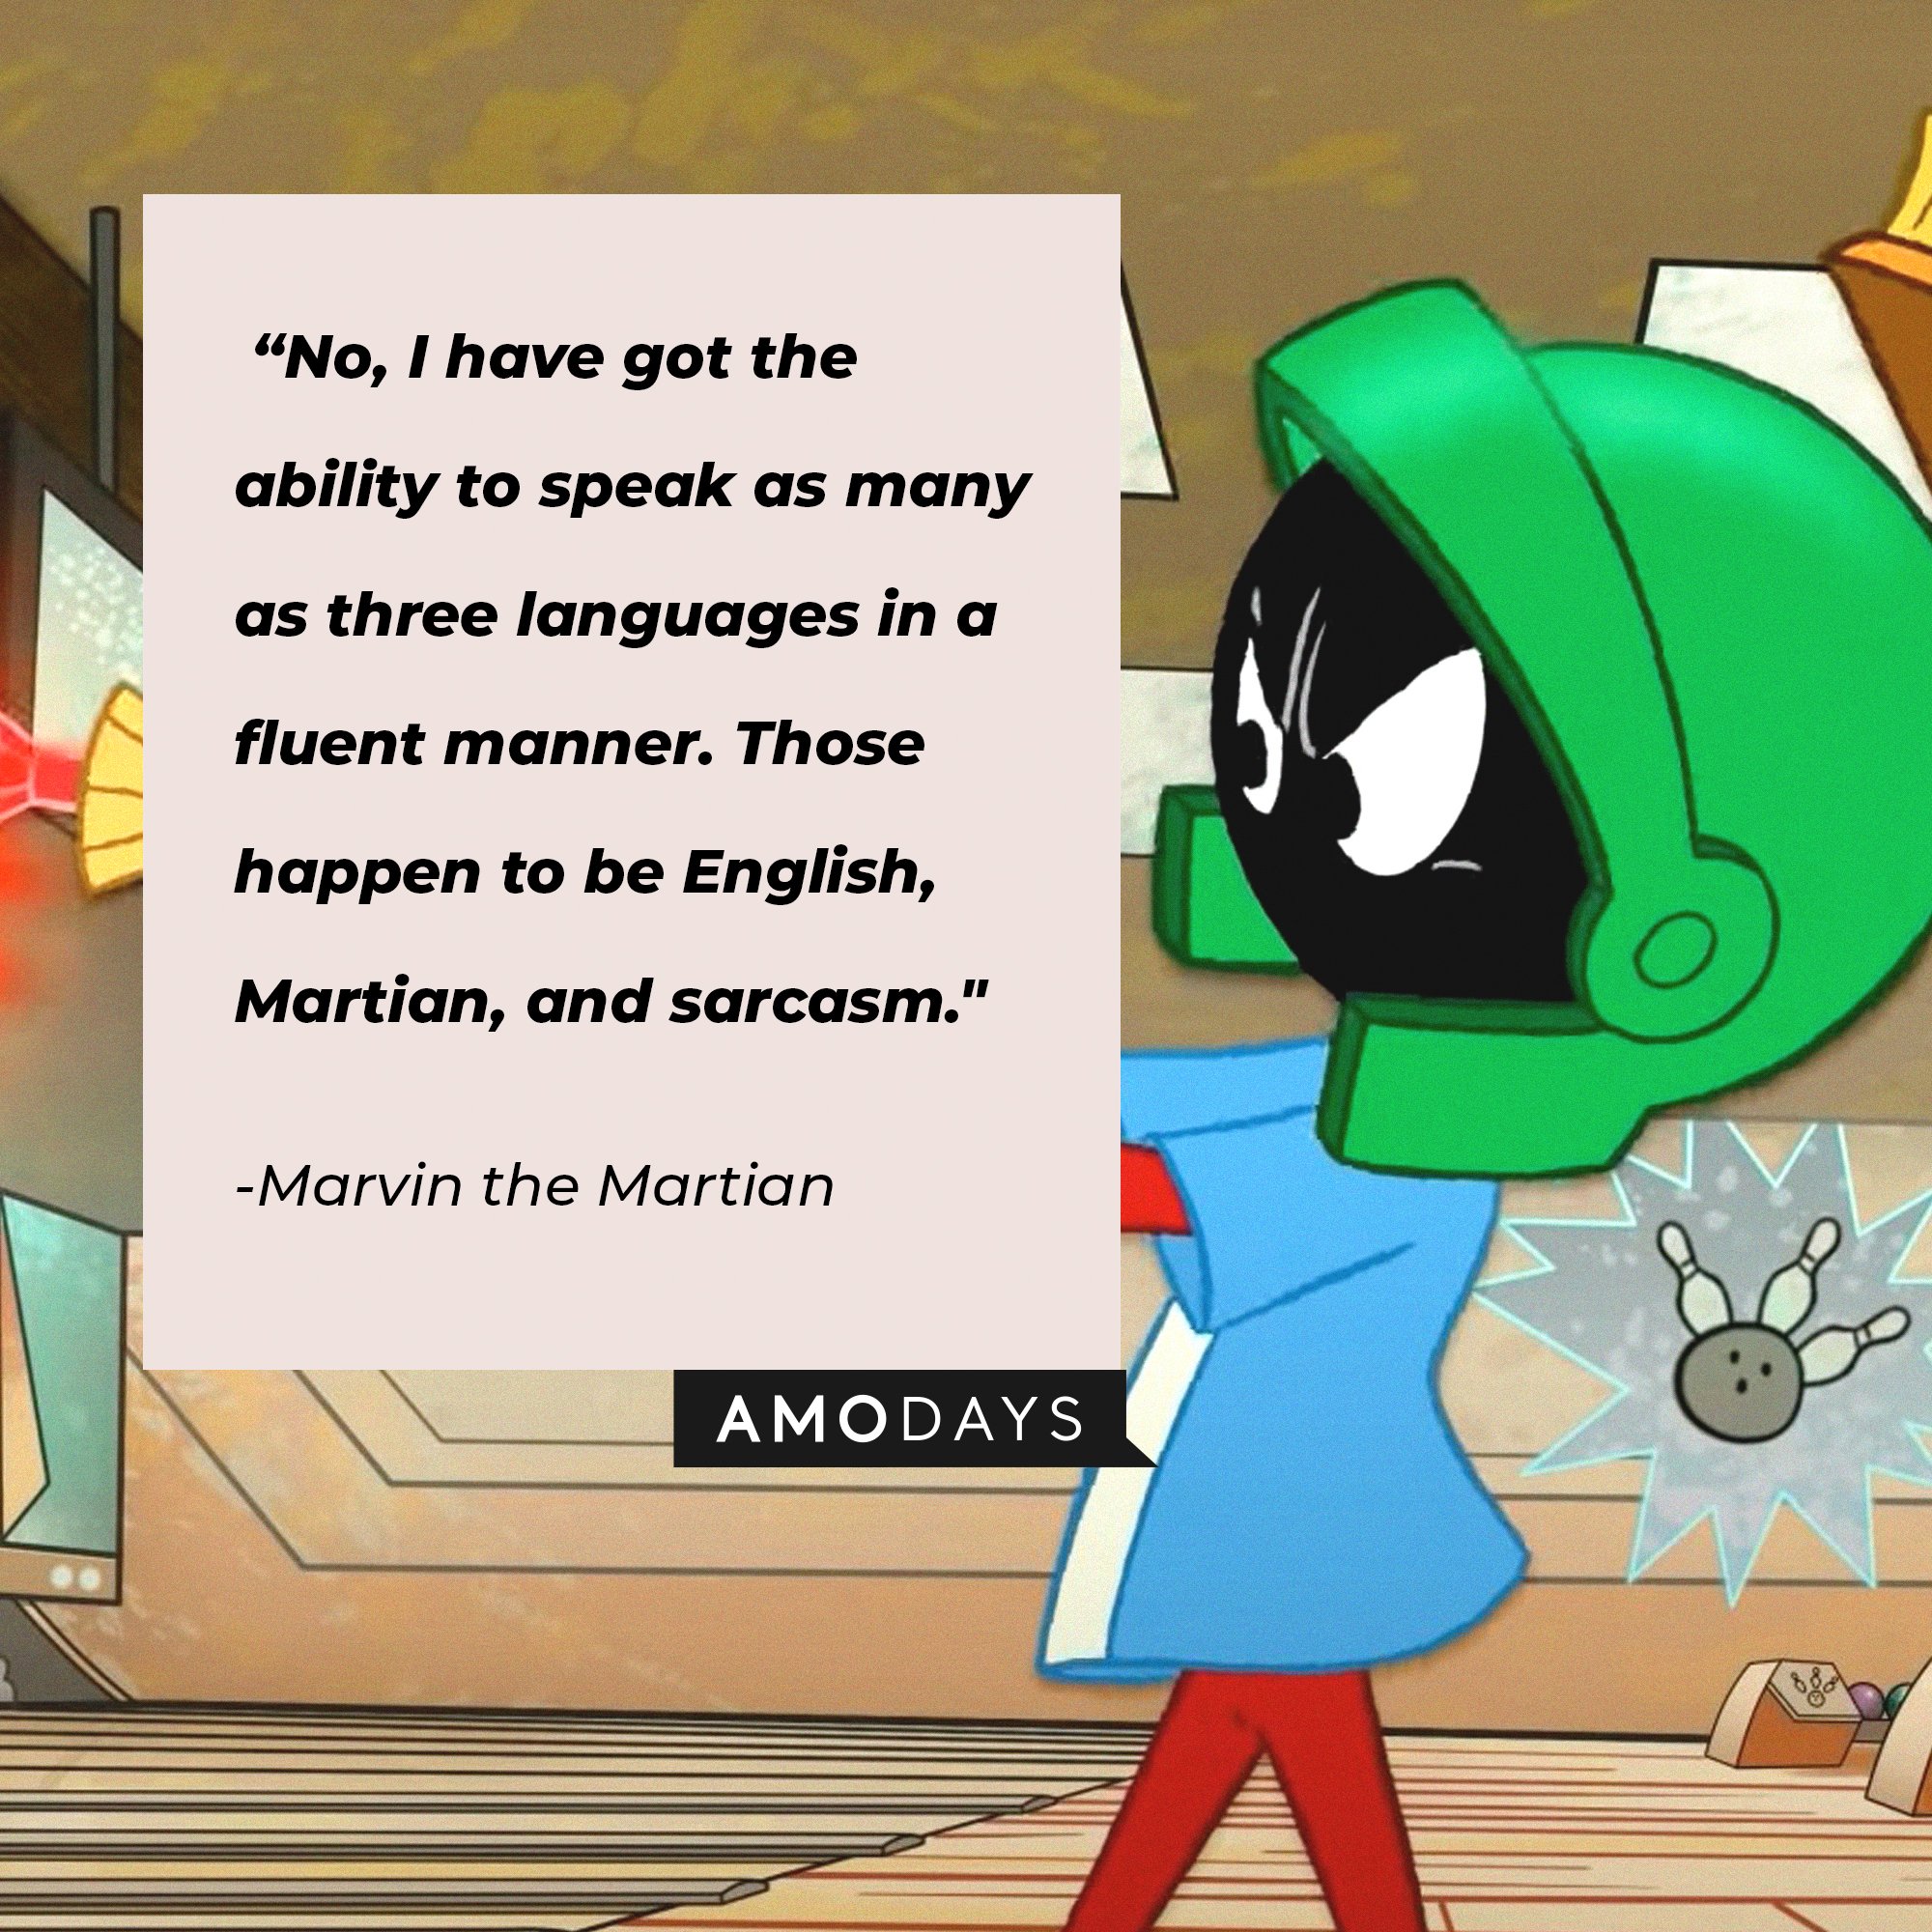 Marvin the Martian’s quote: “No, I have got the ability to speak as many as three languages in a fluent manner. Those happen to be English, Martian, and sarcasm." | Image: AmoDays